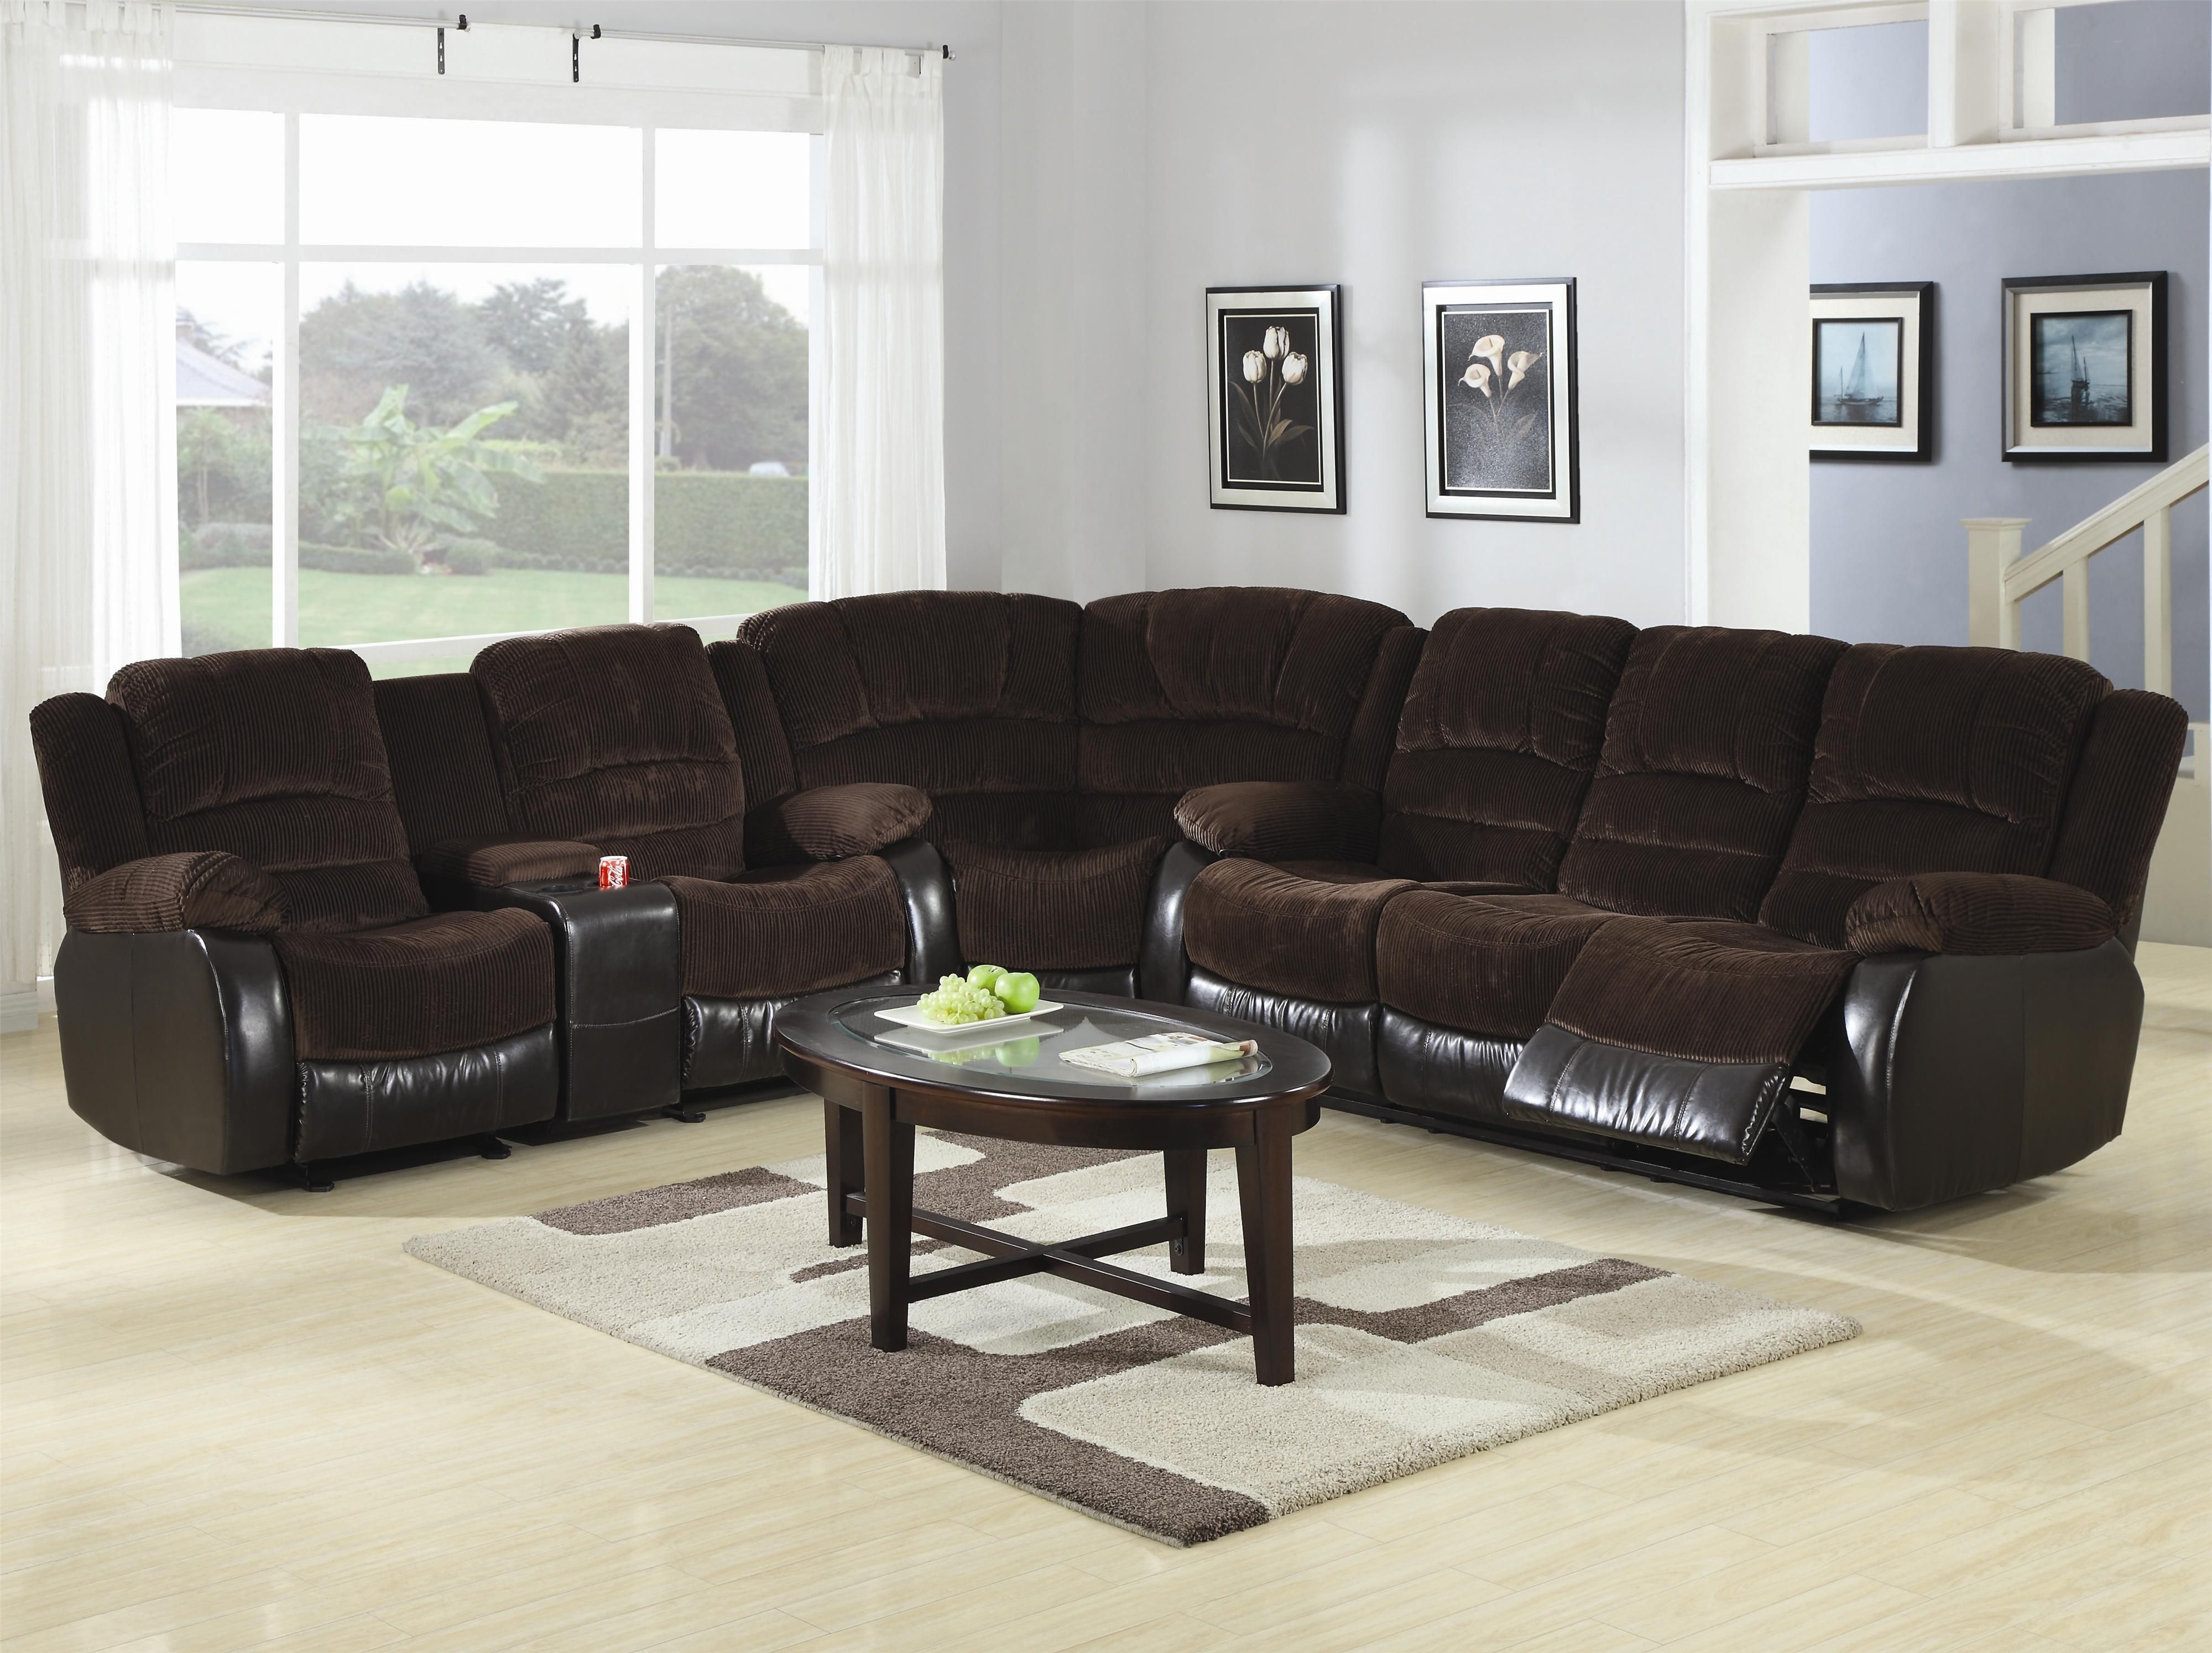 Simple Tables For Sectional Sofas 79 On Target Sectional Sofa With In Target Sectional Sofas (Photo 10 of 10)